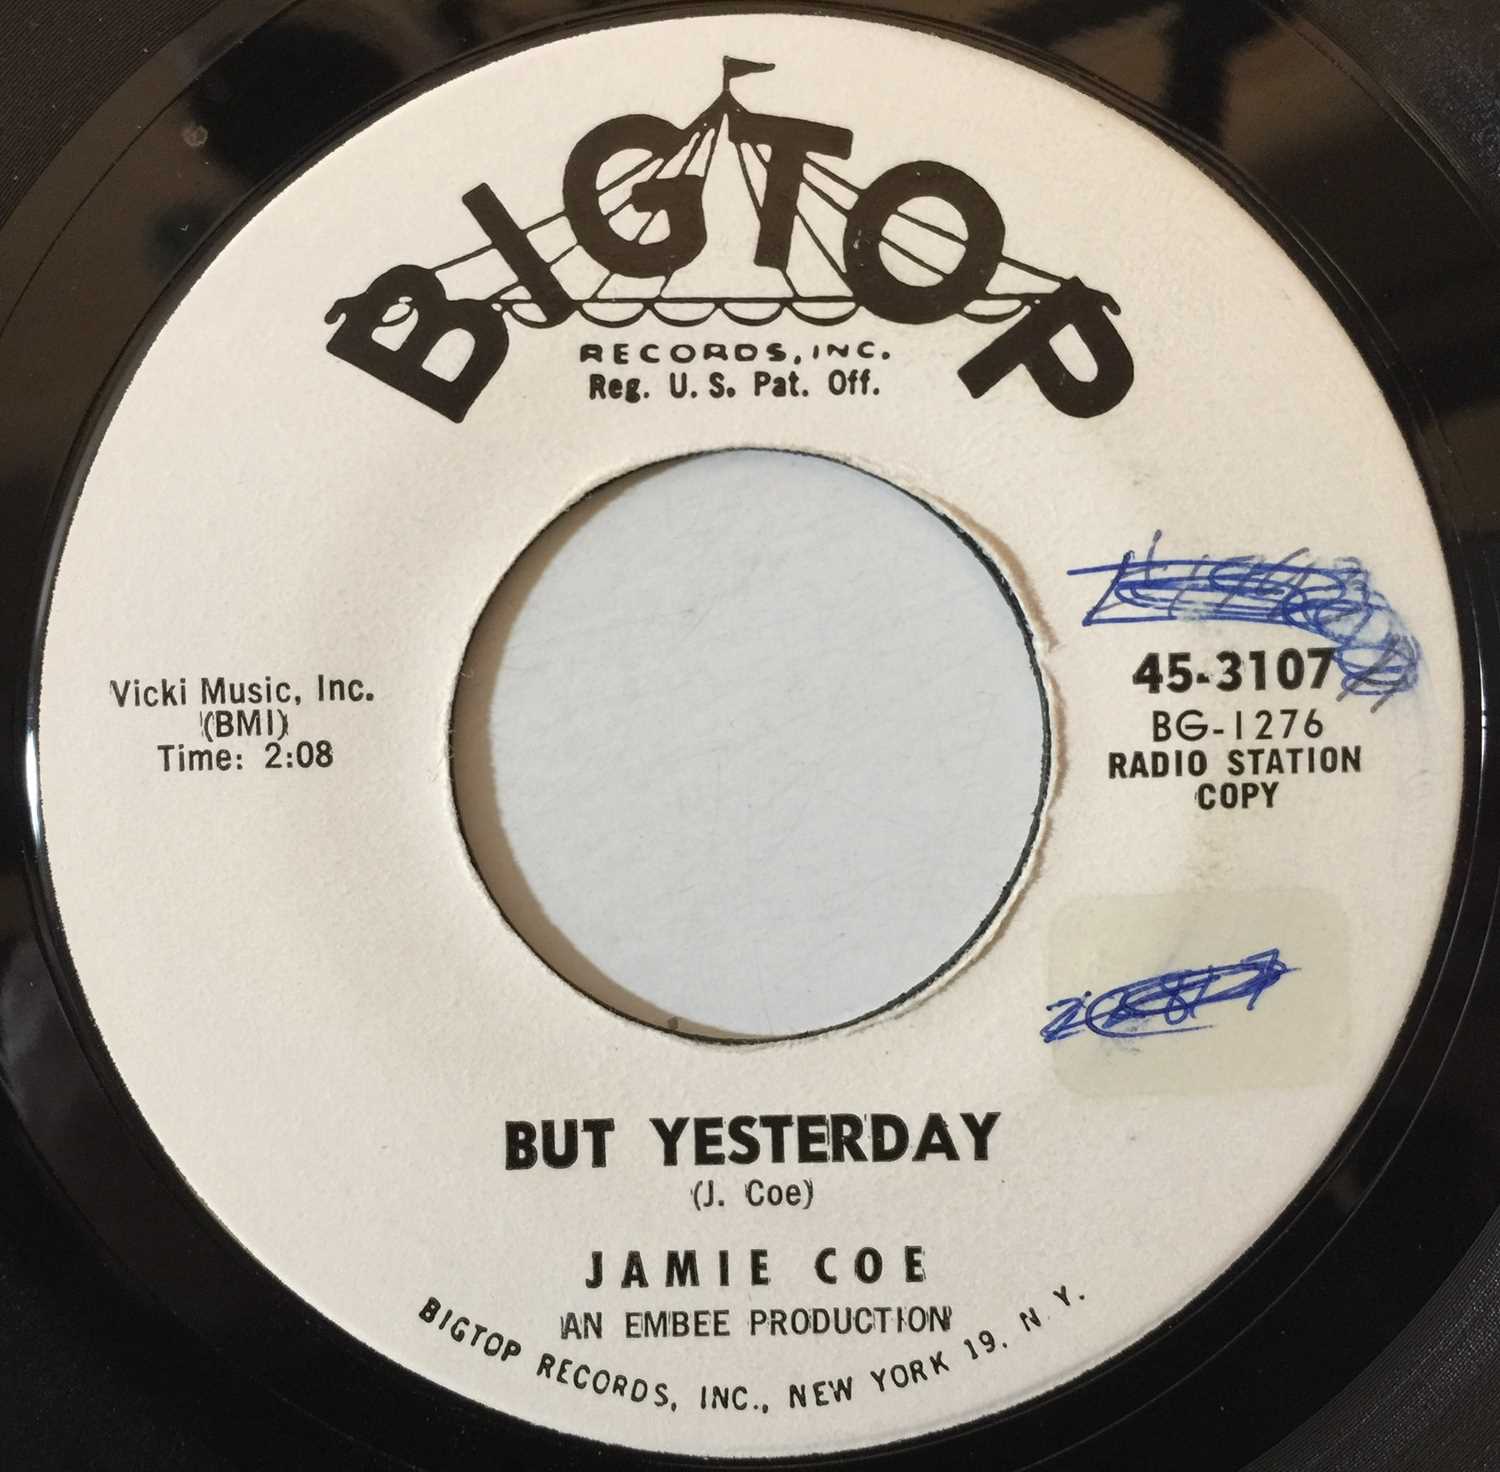 JAMIE COE - CLEOPATRA/ BUT YESTERDAY 7" (45-3107) - Image 3 of 3